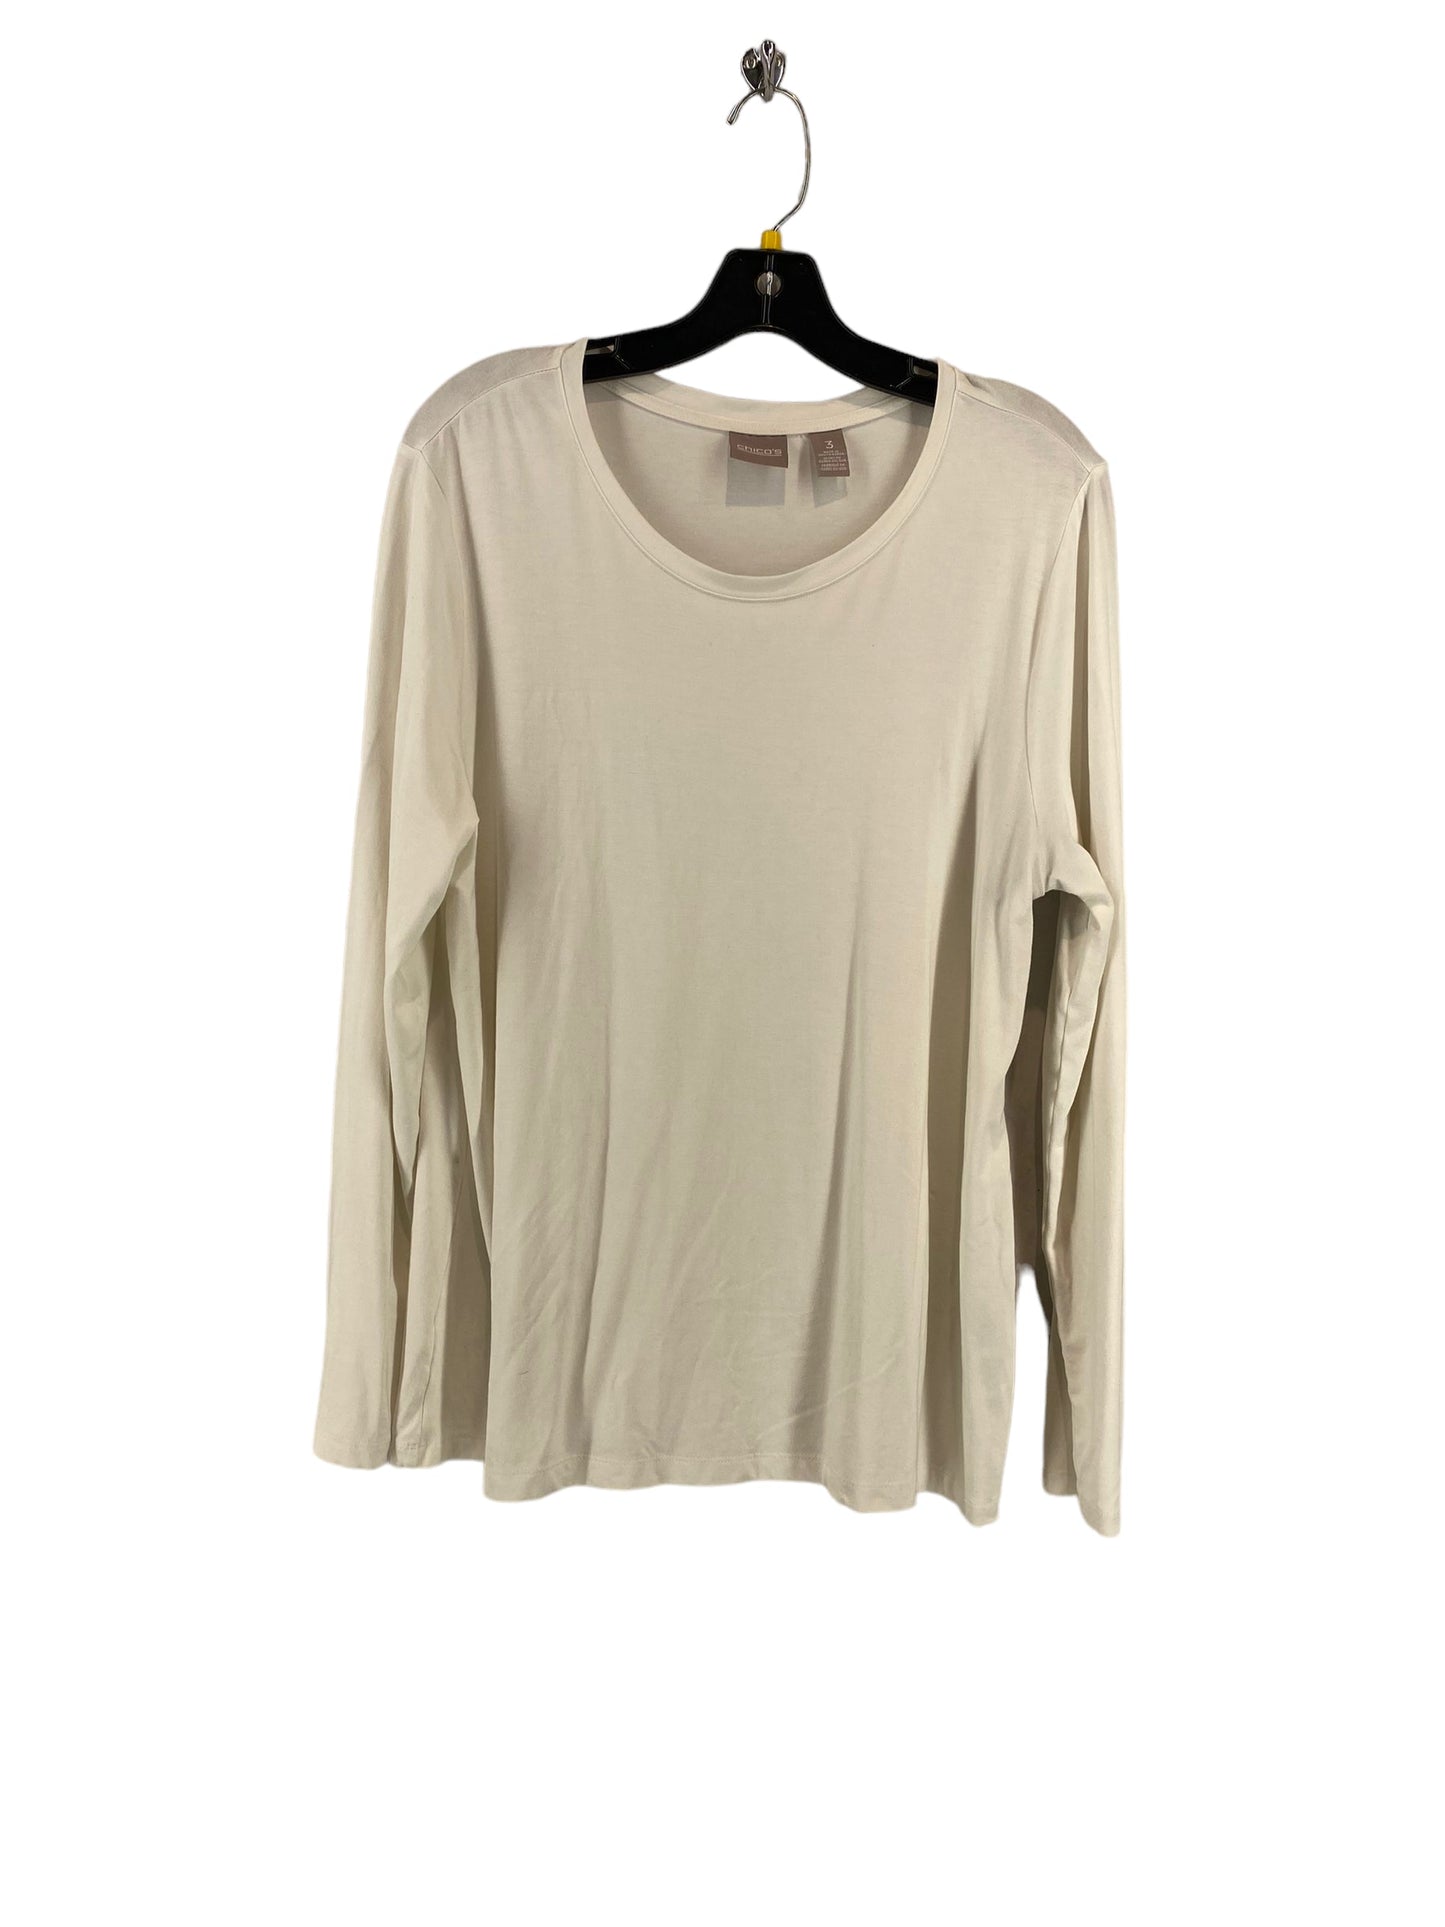 Top Long Sleeve Basic By Chicos  Size: 3